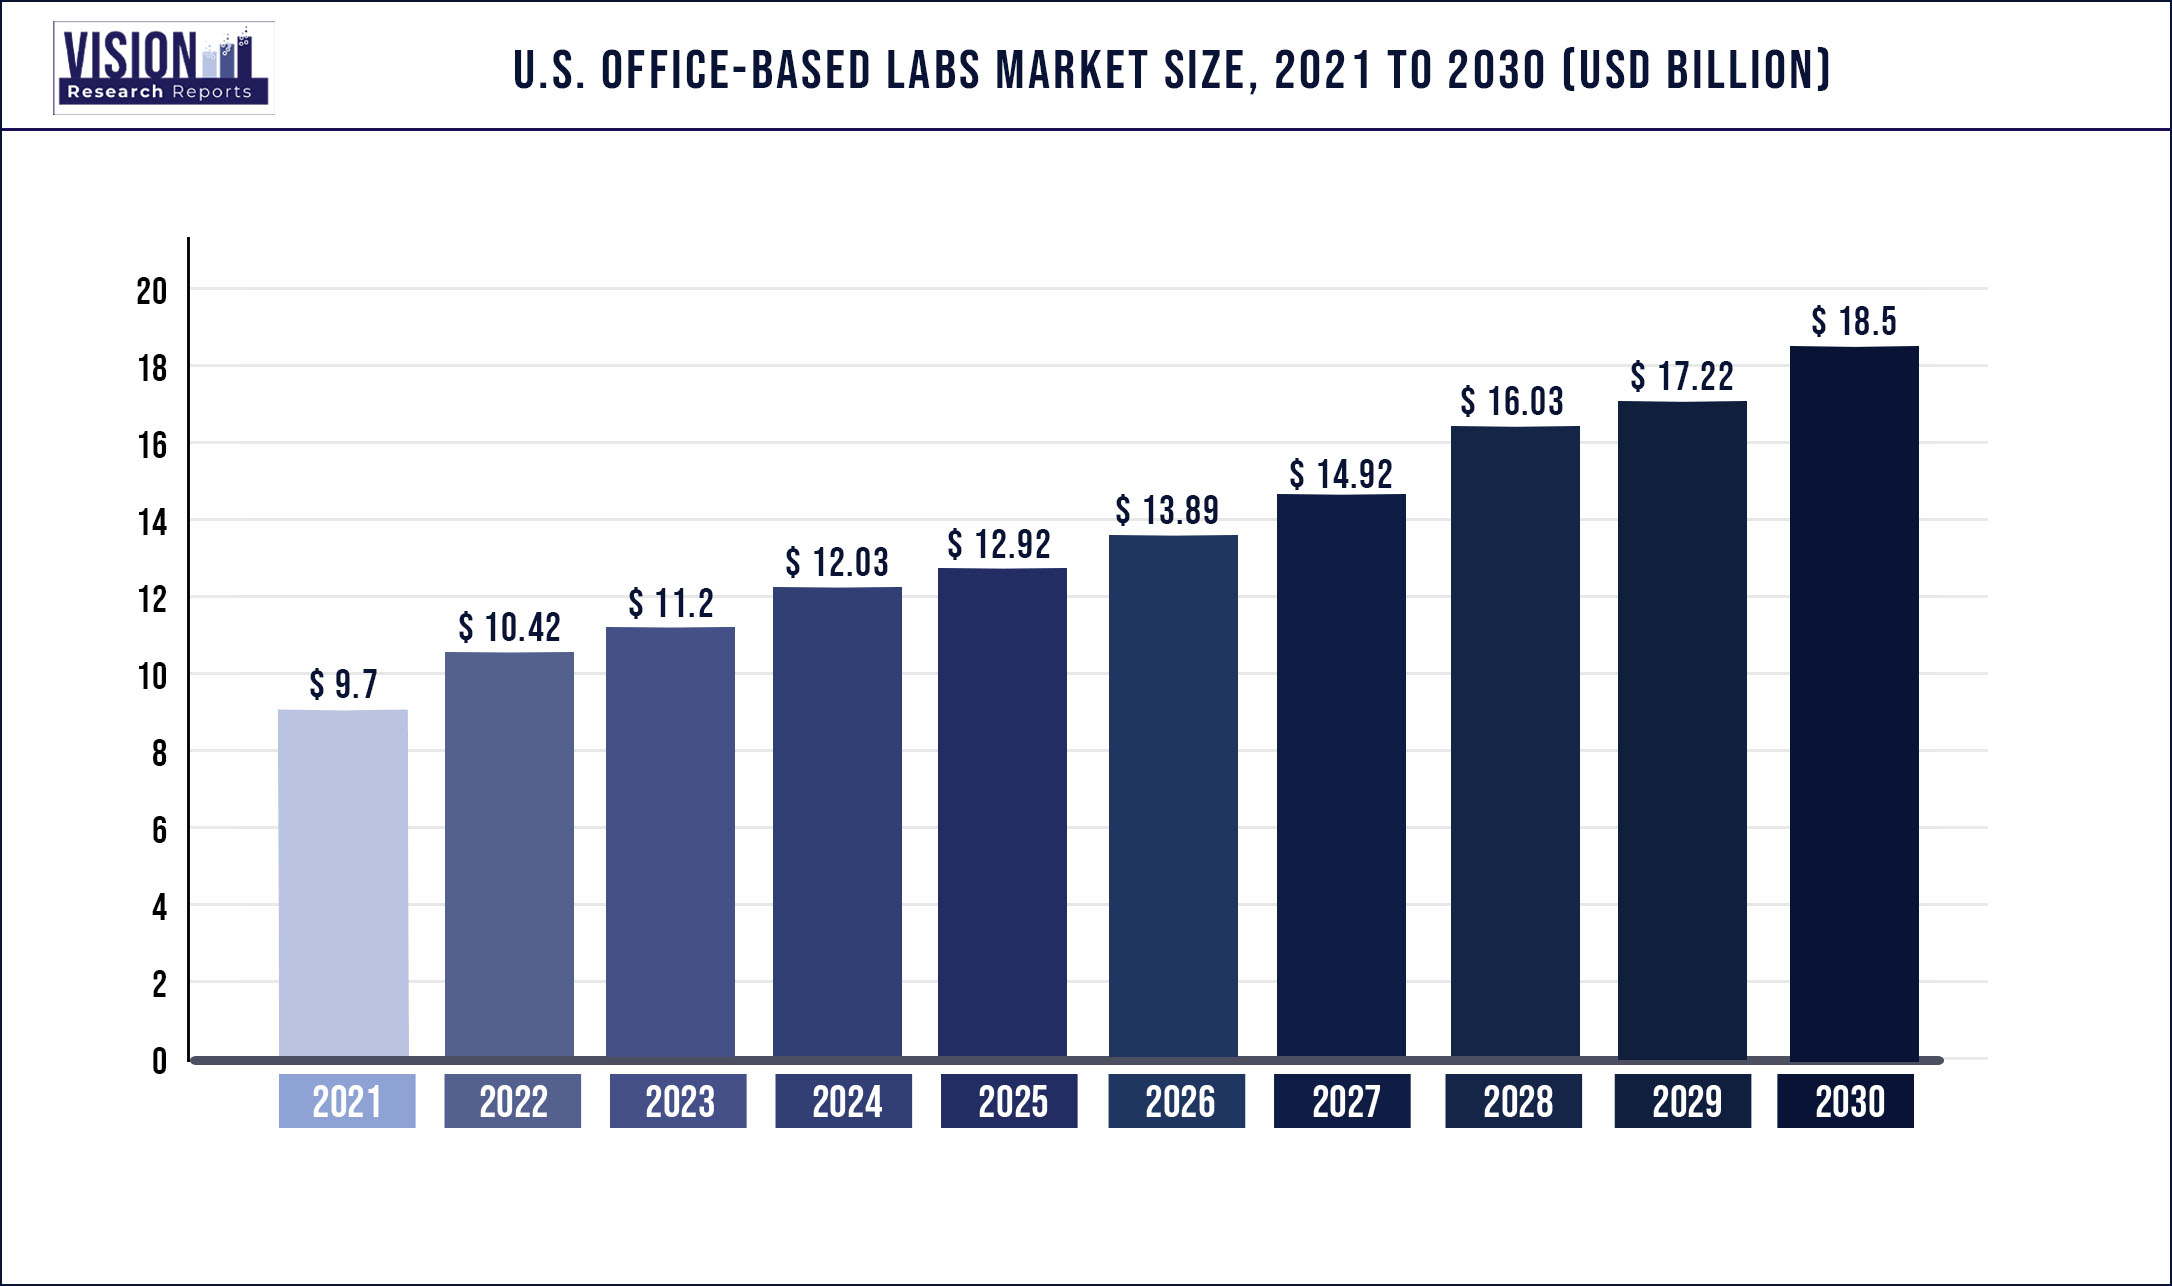 U.S. Office based Labs Market Size 2021 to 2030